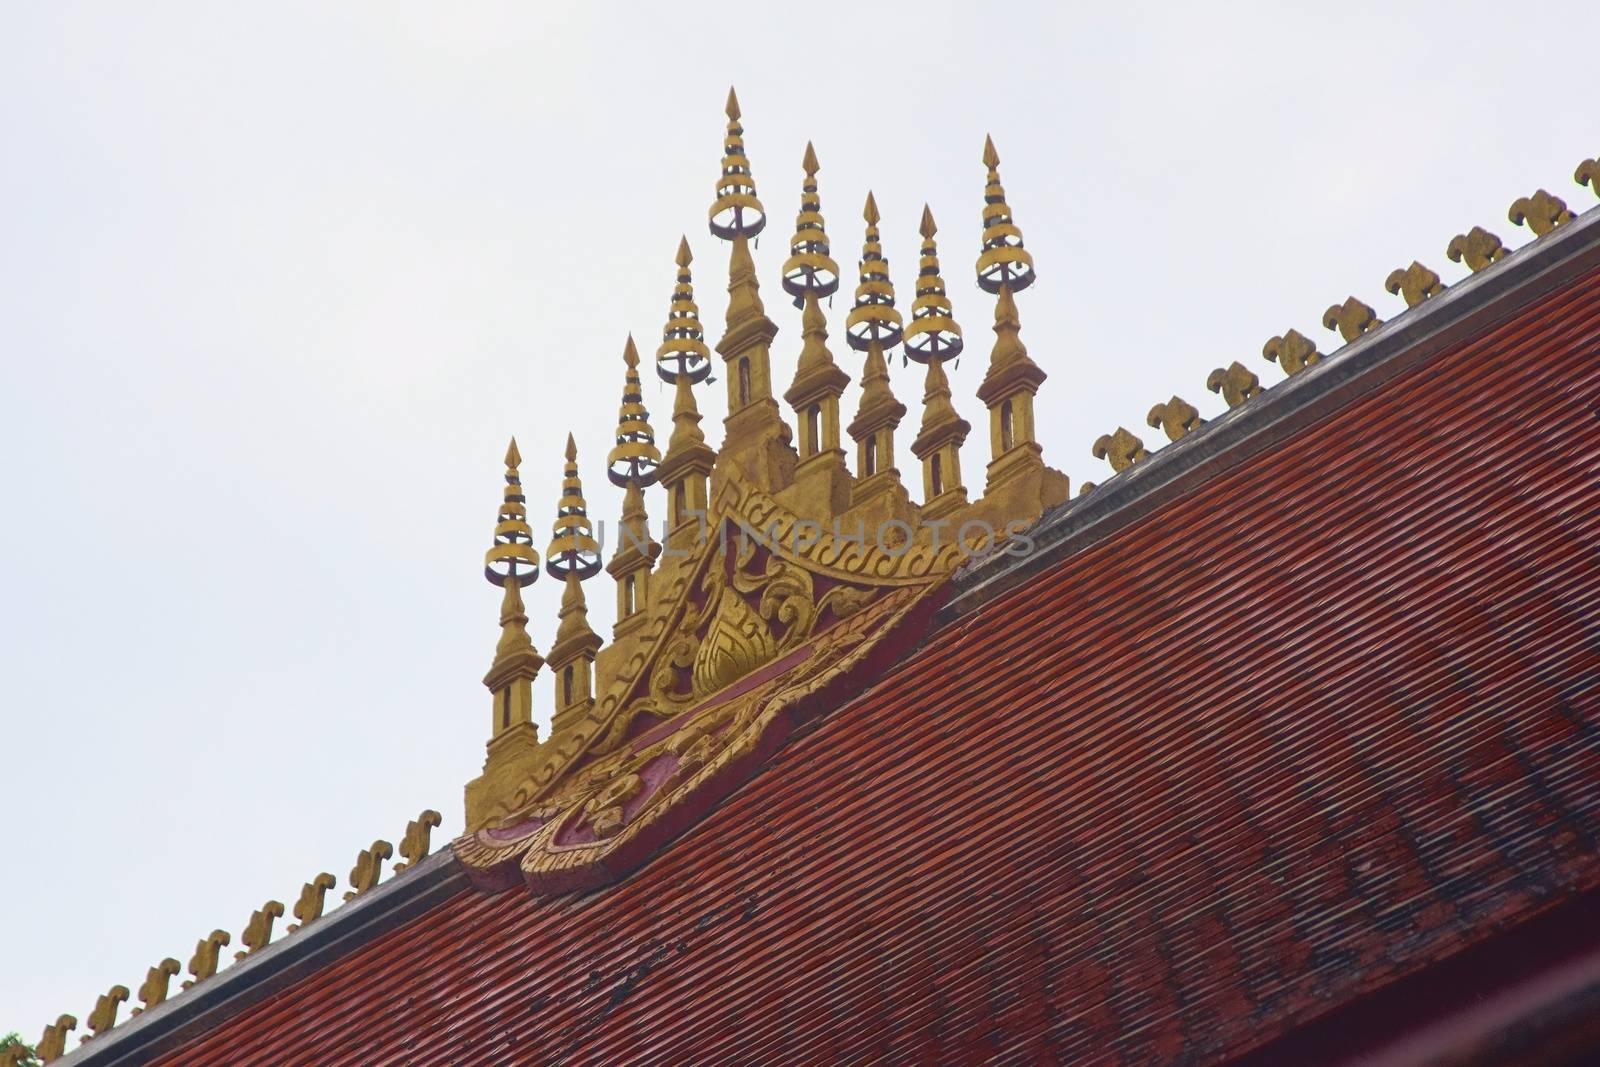 Gilded ornament representing stupas on the rooftop of a Buddhist temple in Luang Prabang, Laos.